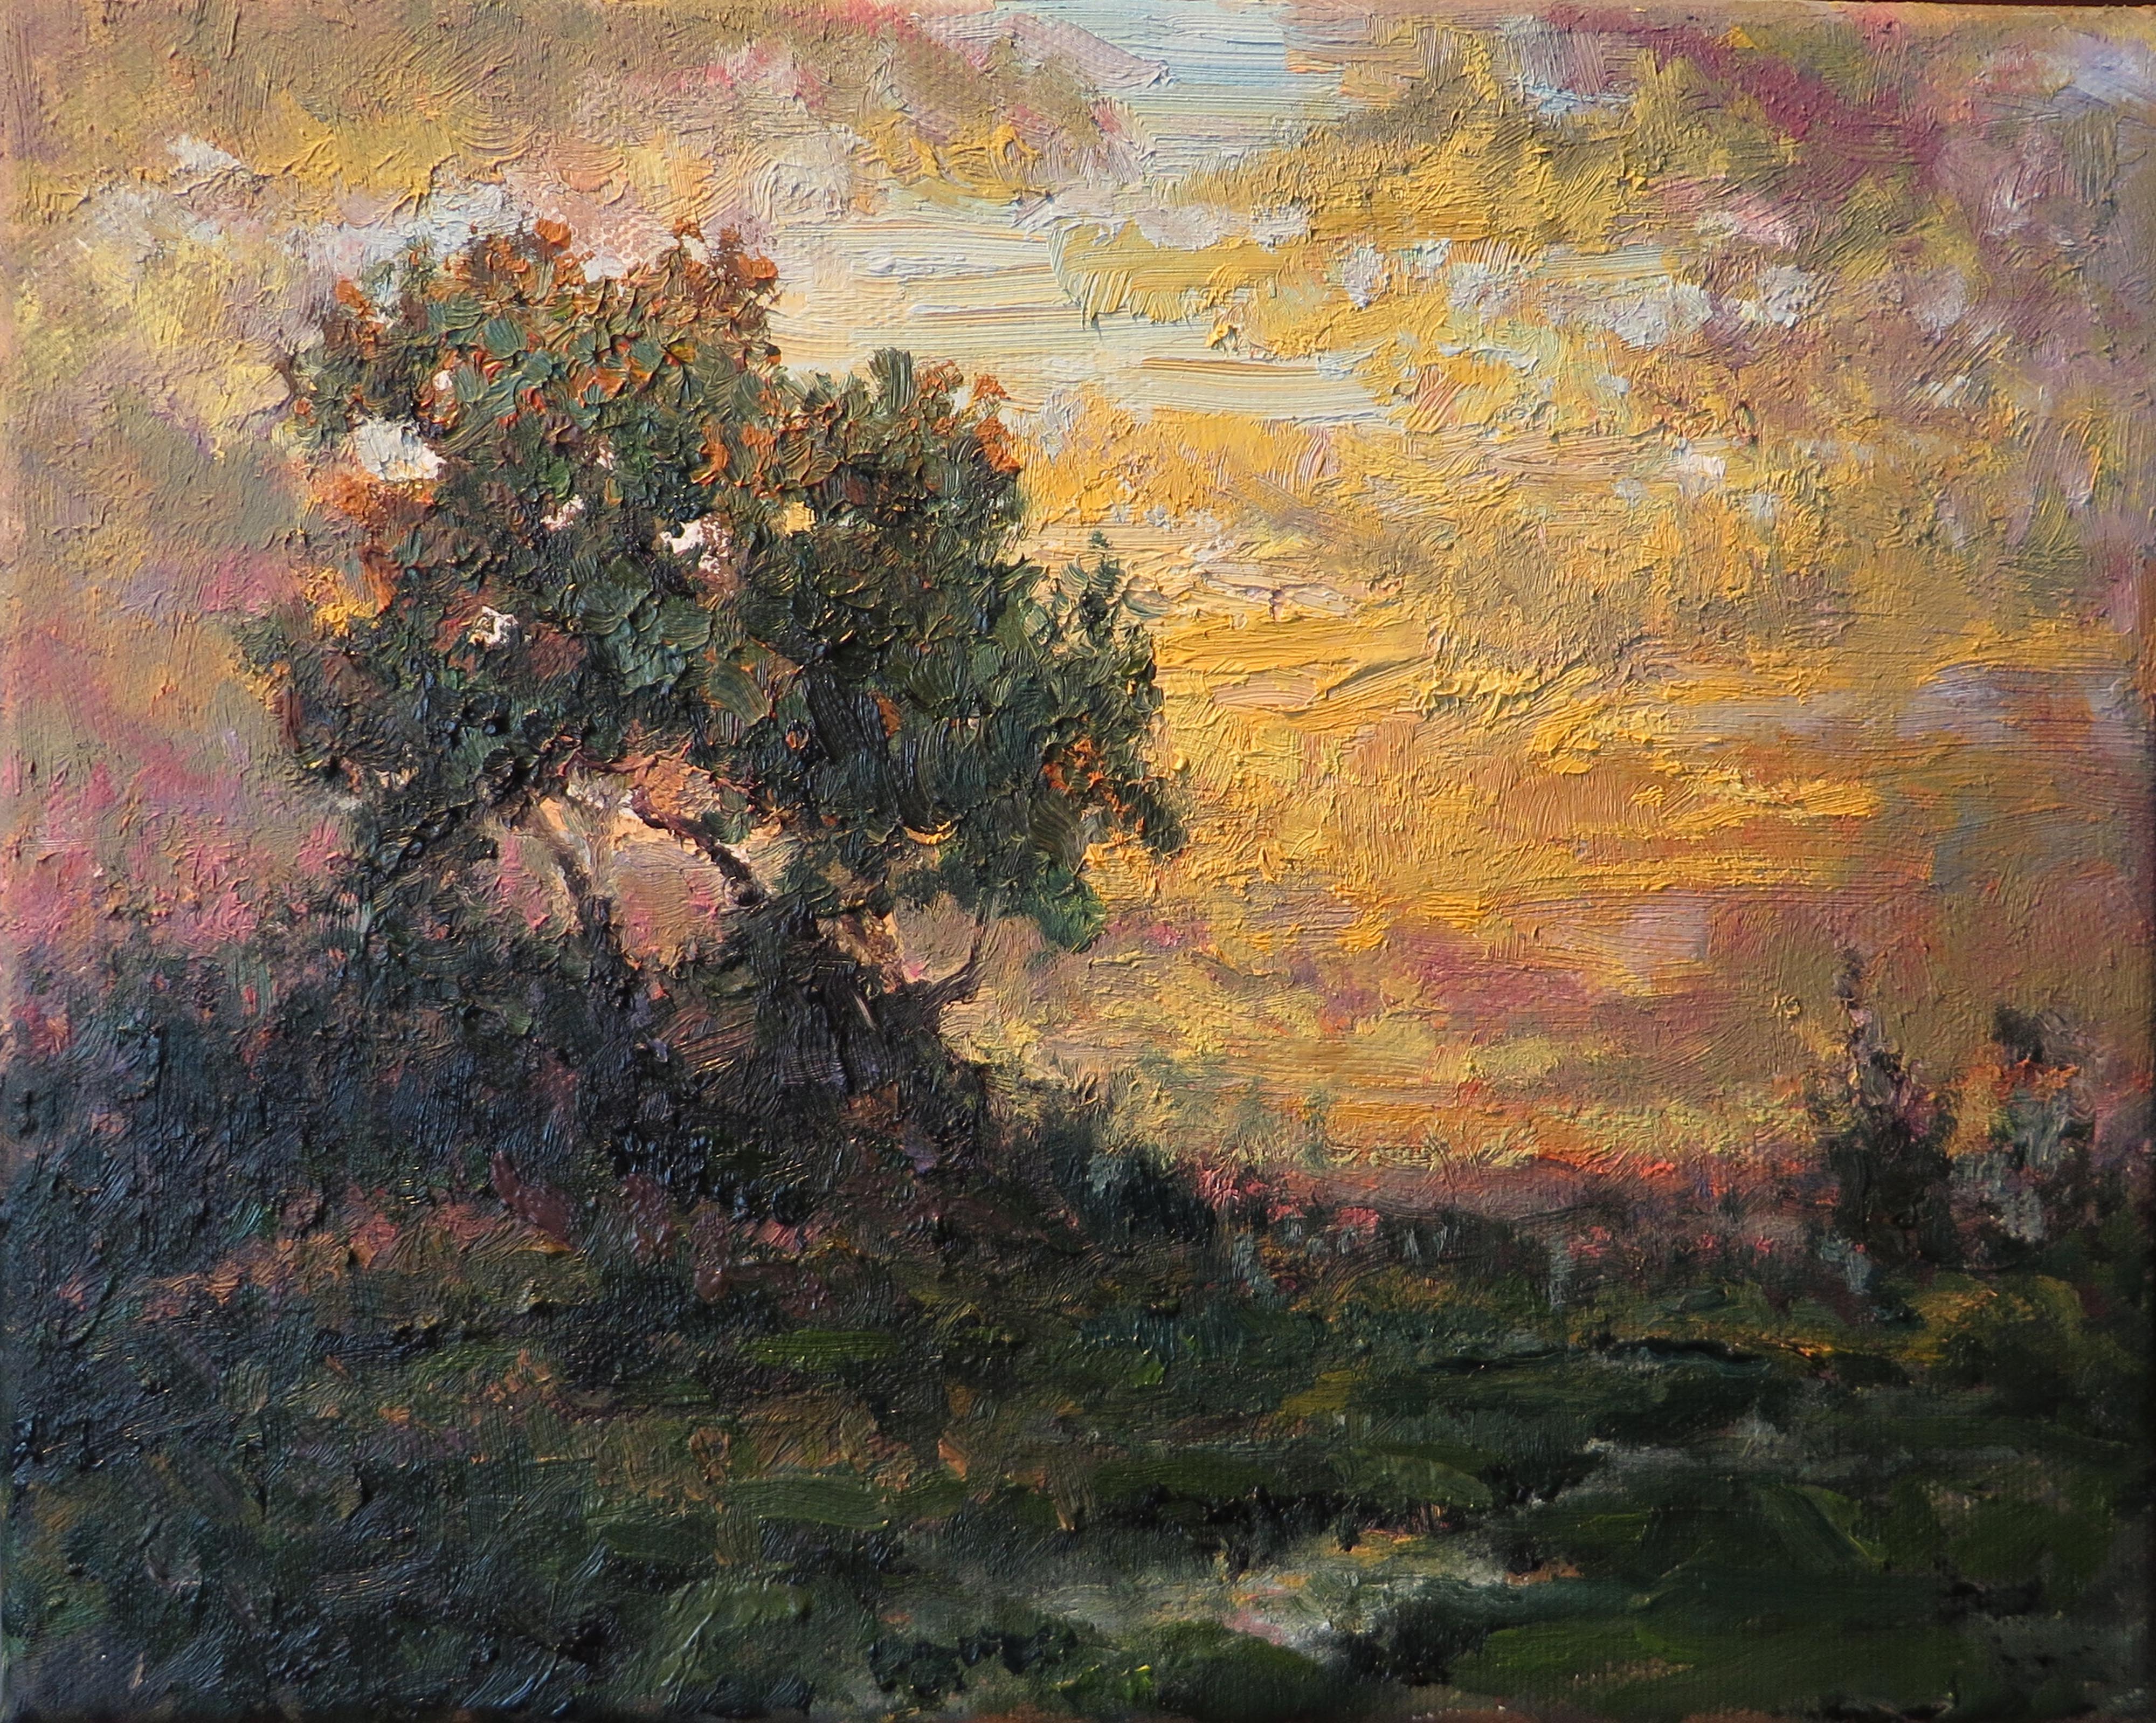 Windy, oil on canvas by Frank Stock